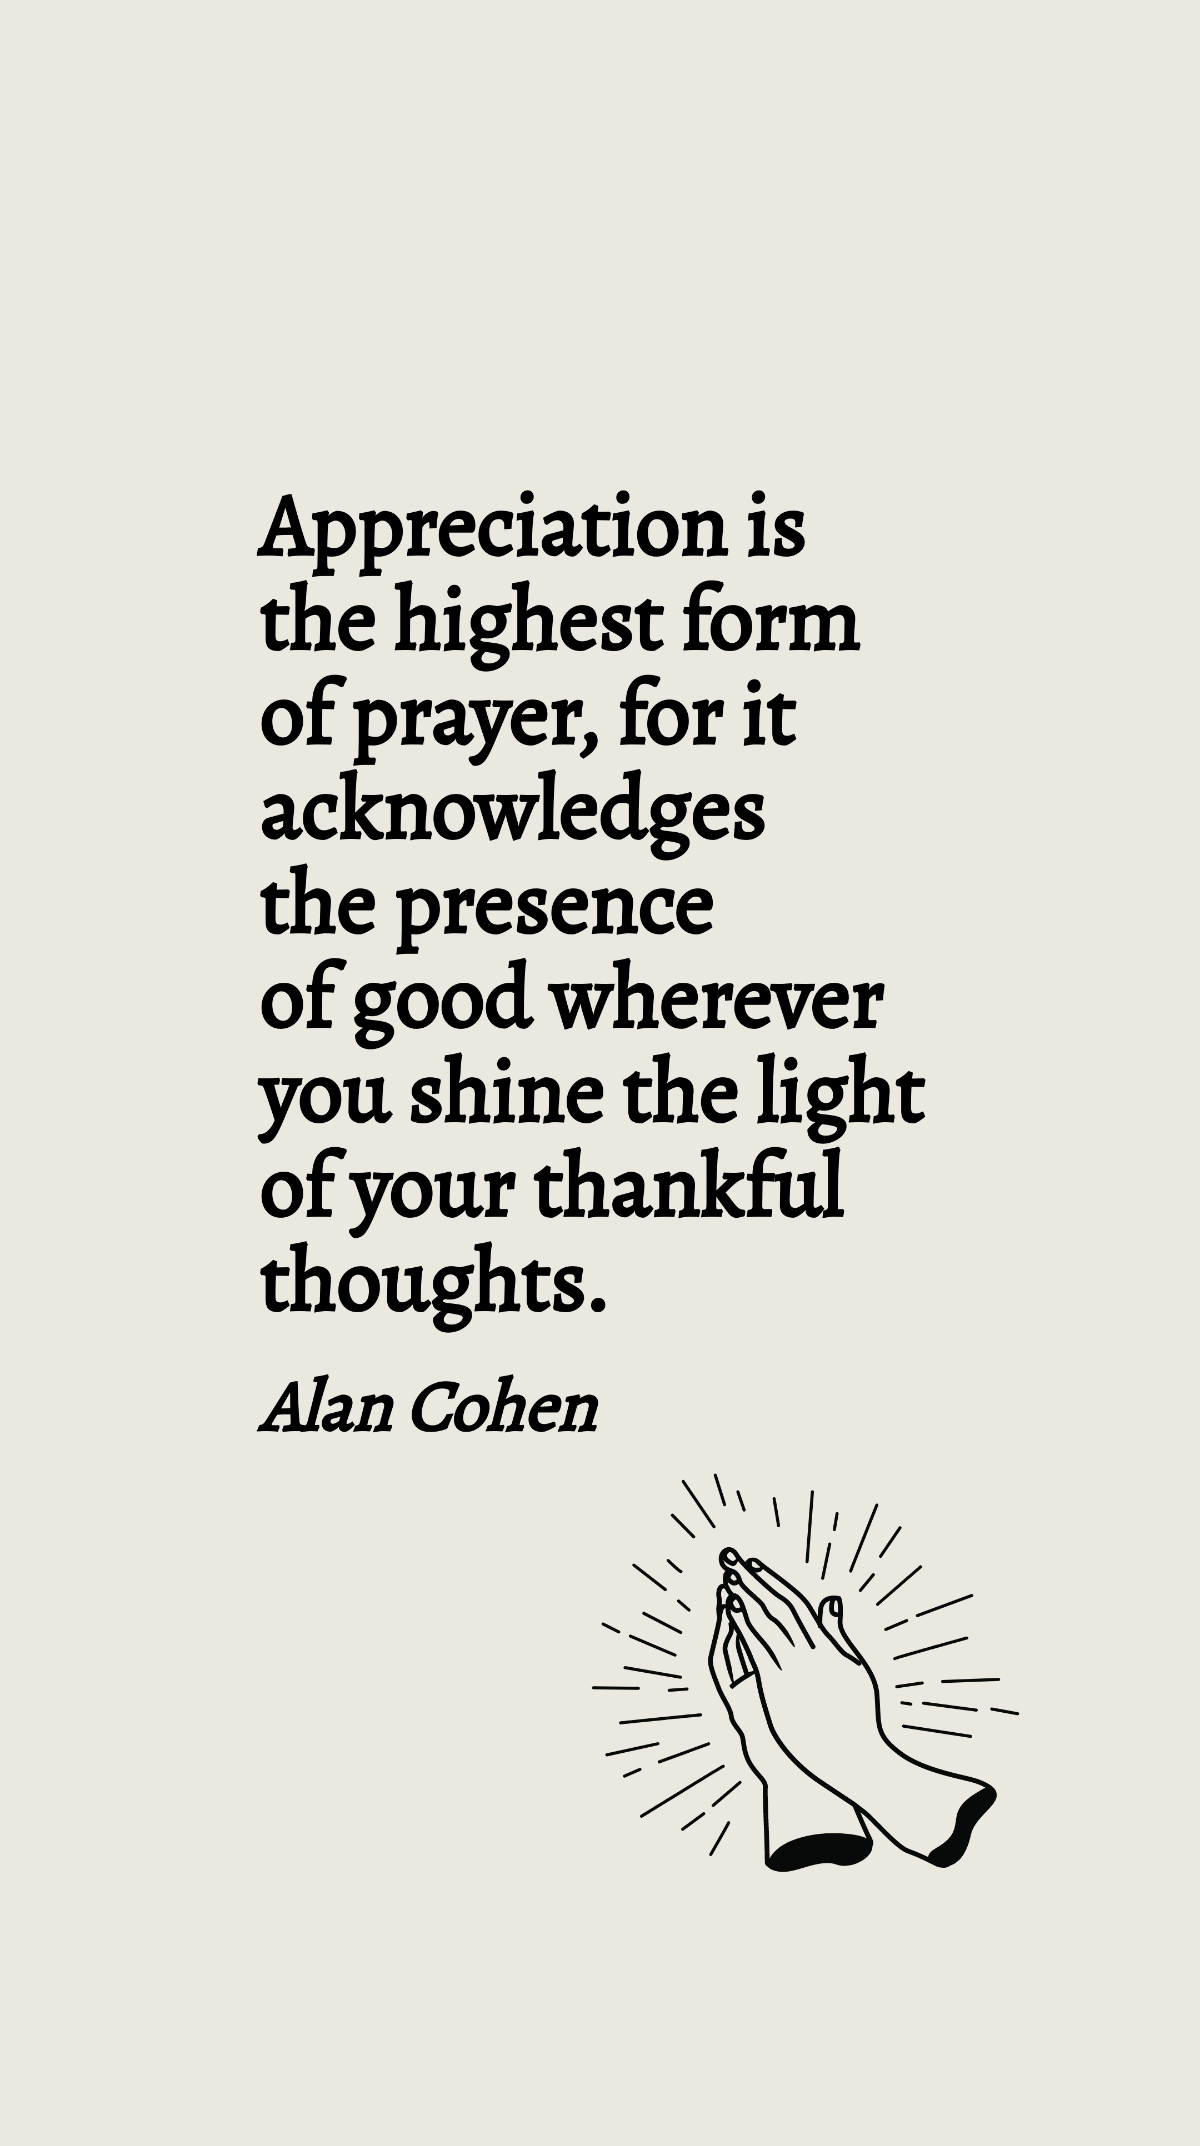 Free Alan Cohen - Appreciation is the highest form of prayer, for it acknowledges the presence of good wherever you shine the light of your thankful thoughts. Template